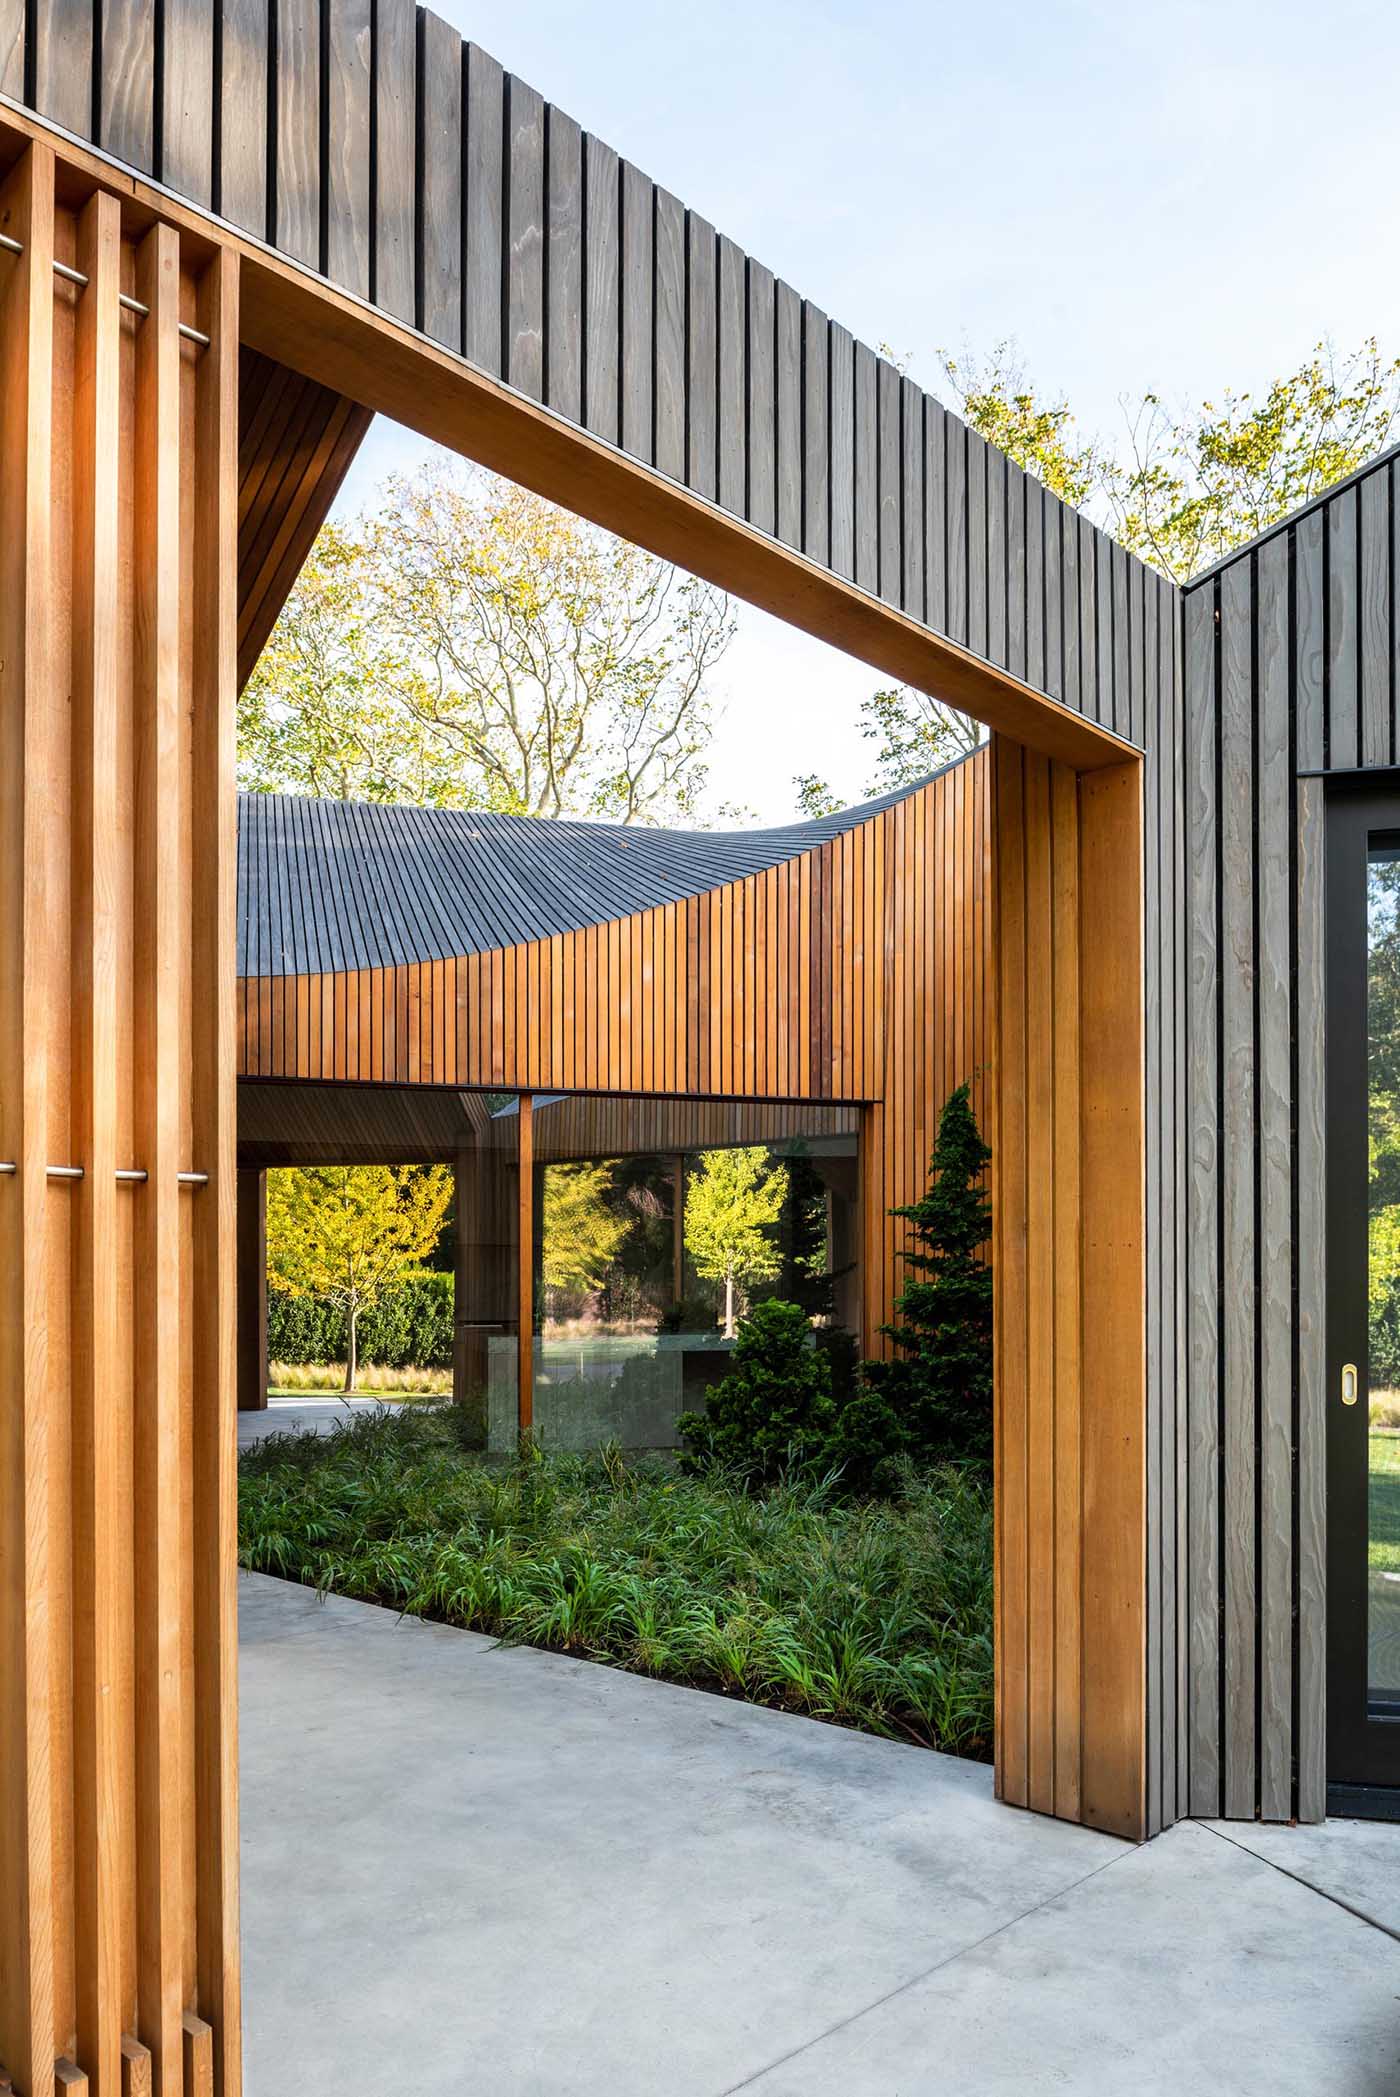 Ochre-hued cedar clads this home’s hybrid indoor/outdoor zones, such as the triangular courtyard and porch.